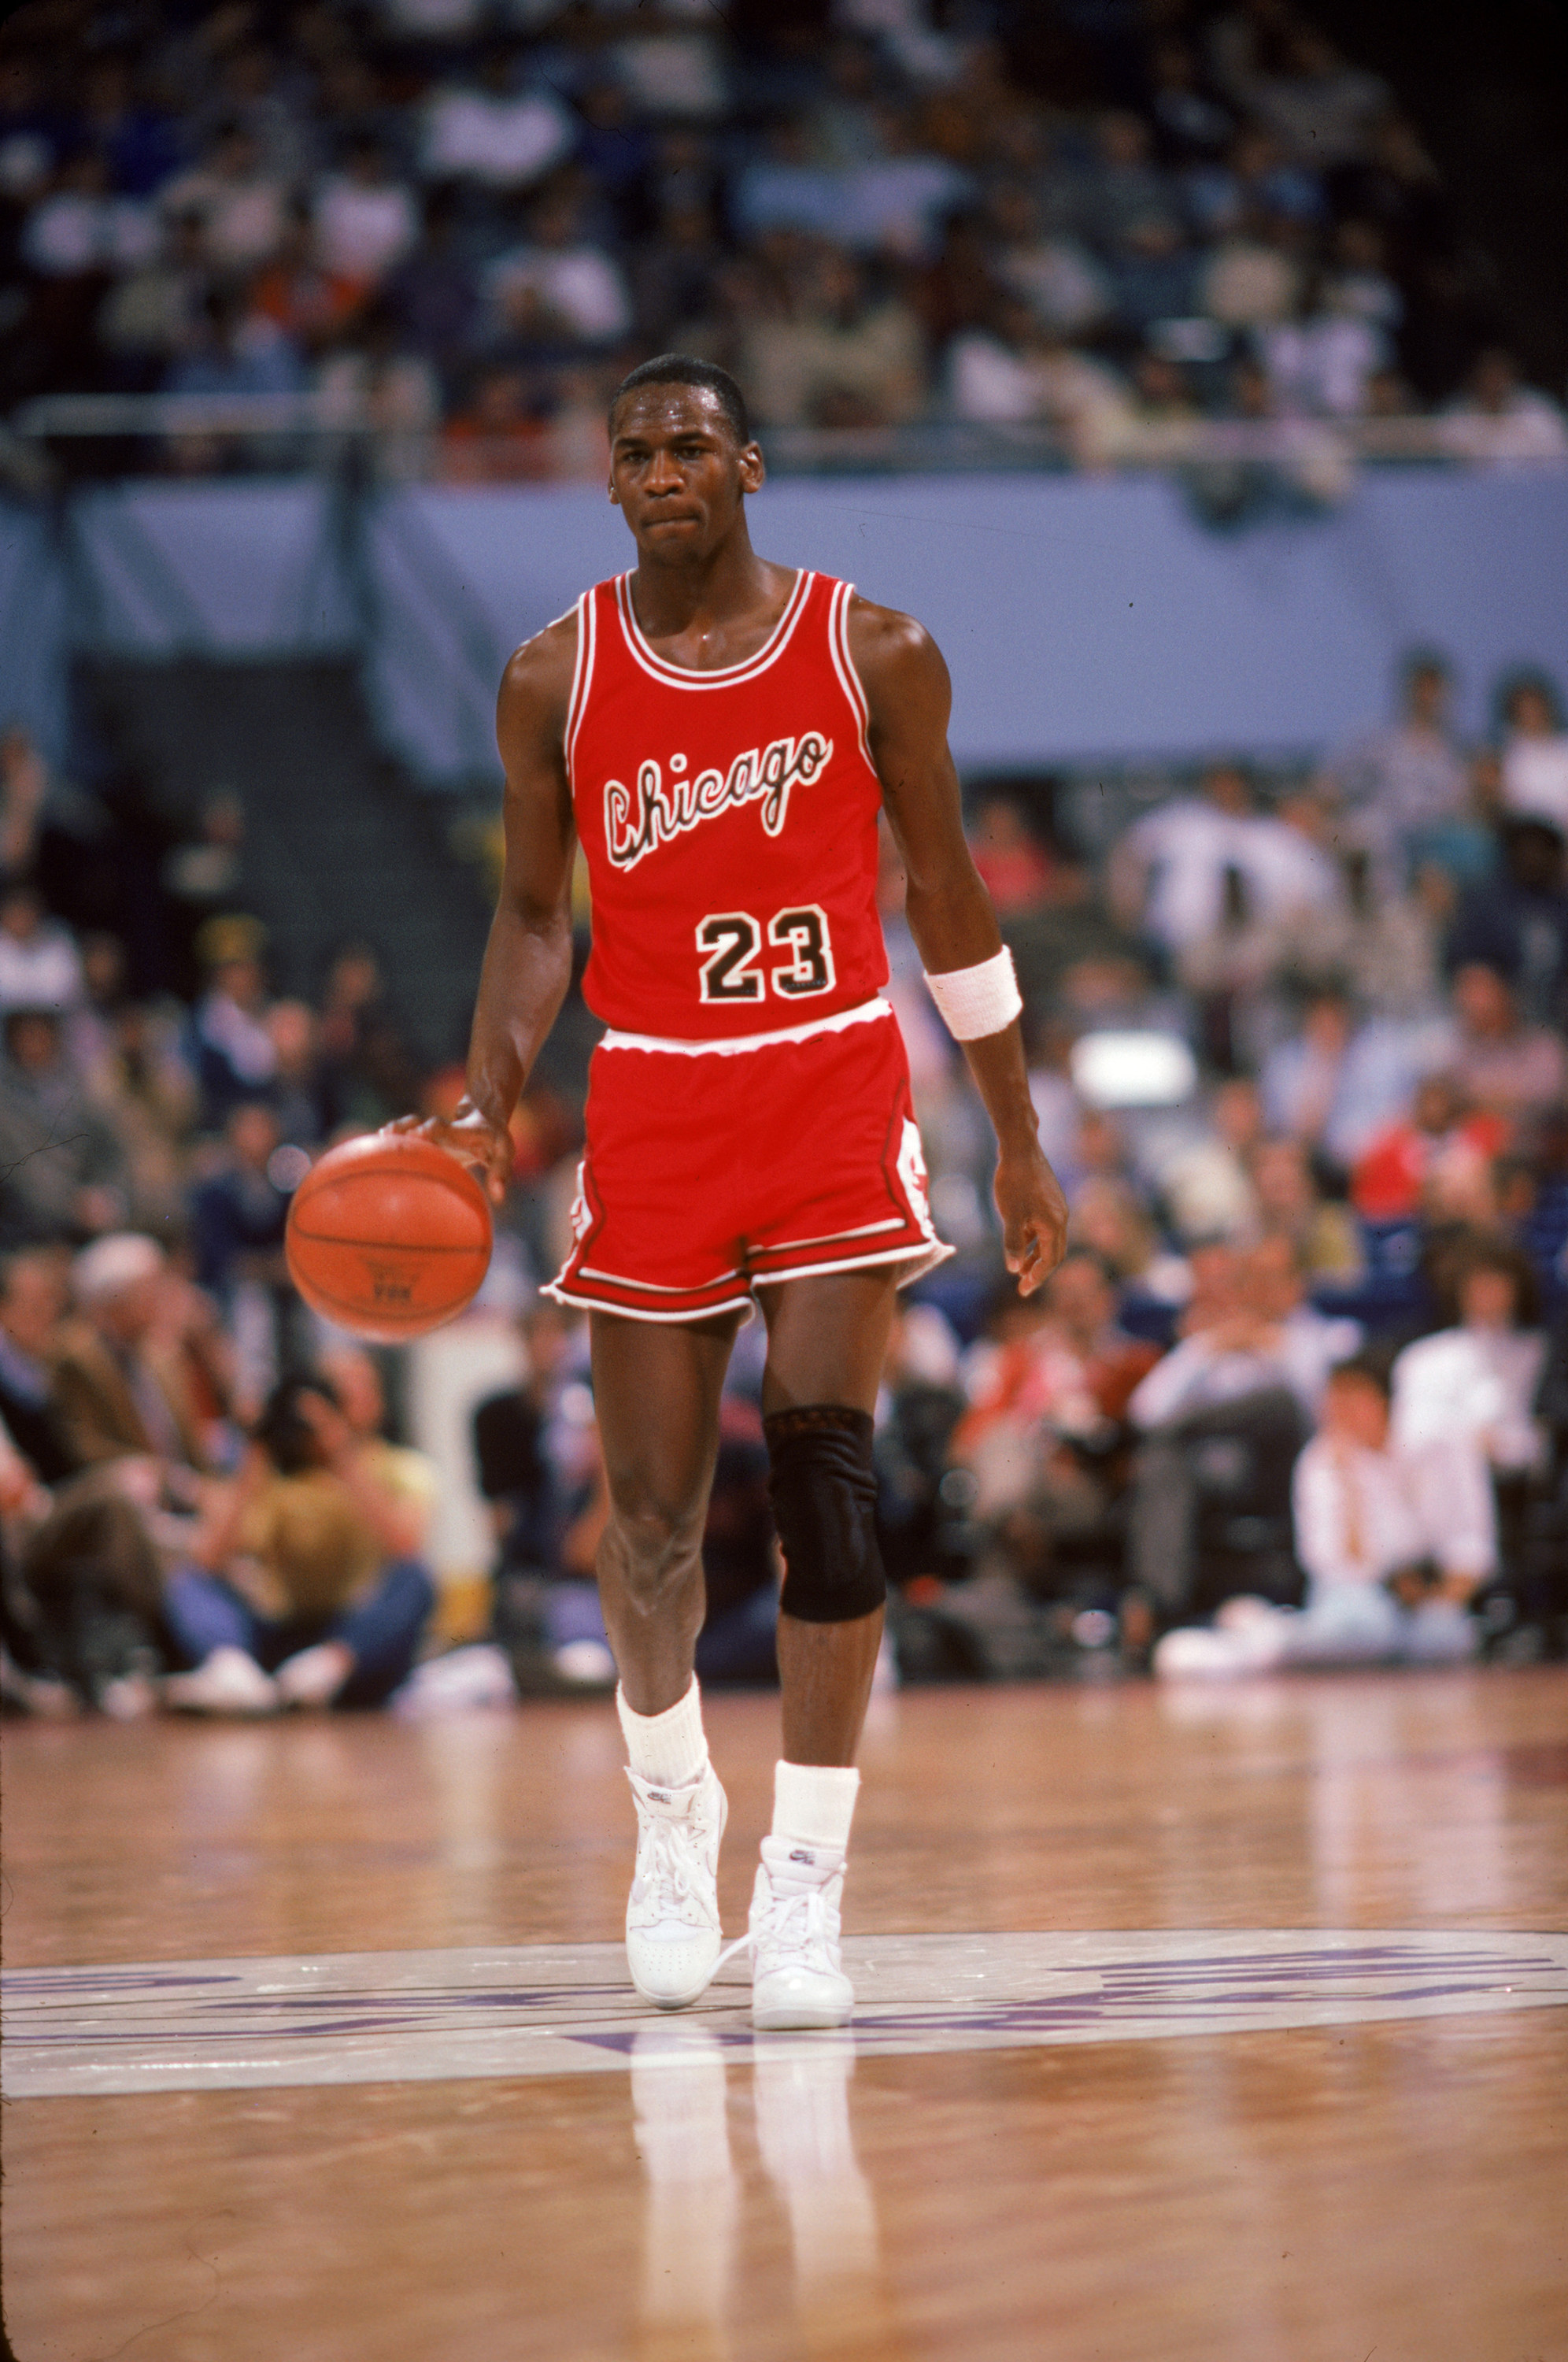 Michael Jordan of the Chicago Bulls brings the ball upcourt against the Los Angeles Clippers during a 1984-85 season game at the Sports Arena in Los Angeles. Photo: Getty Images